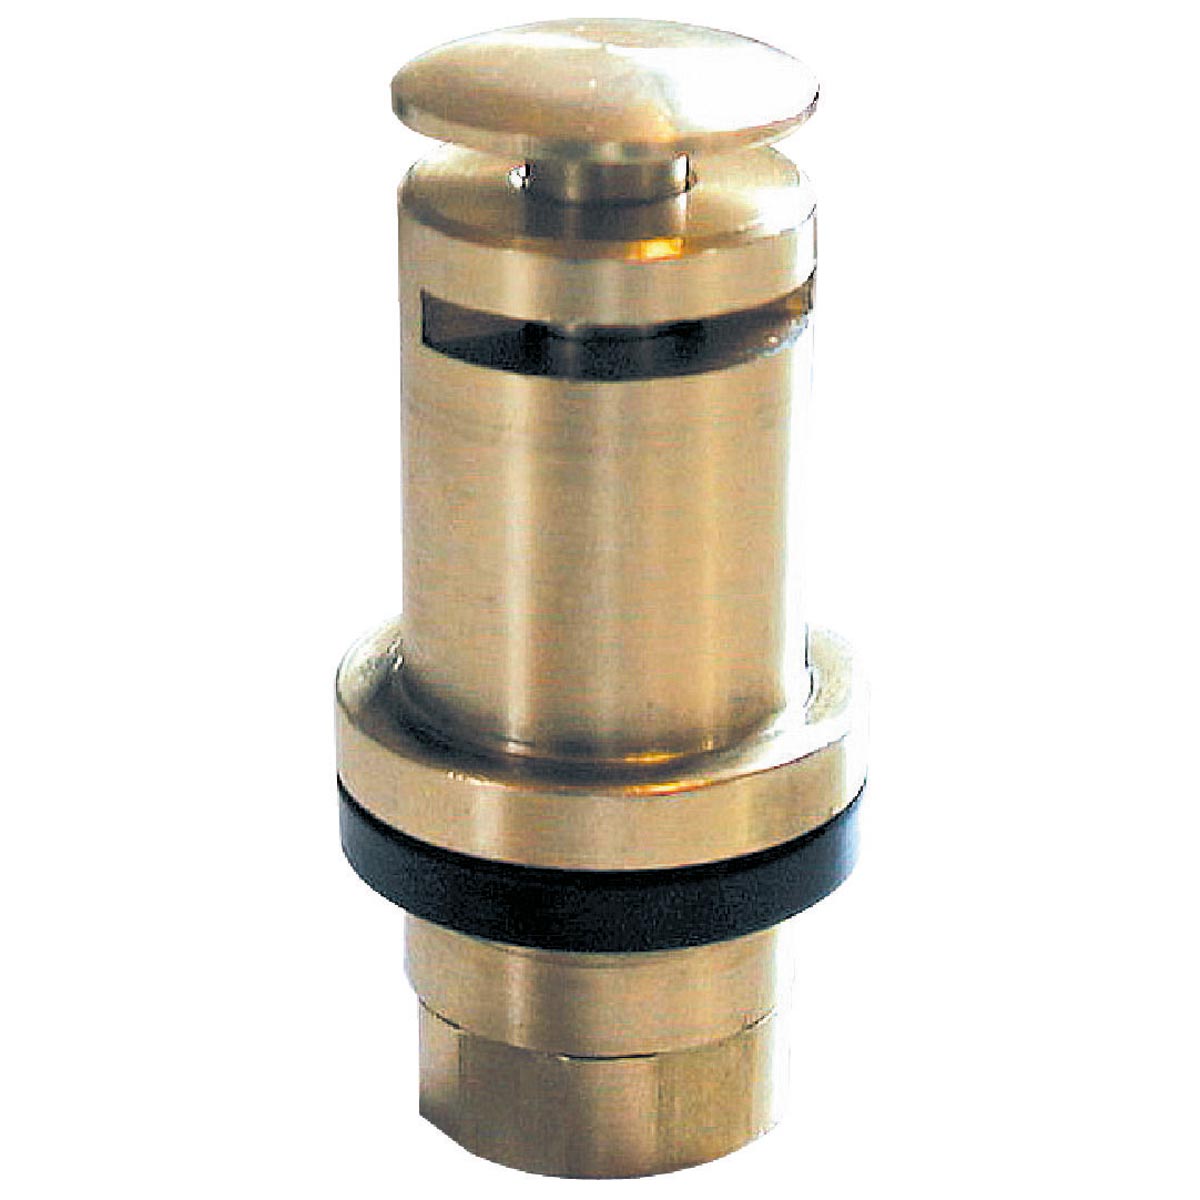 Spare valve brass for water bowl 221500, G16 & 222000